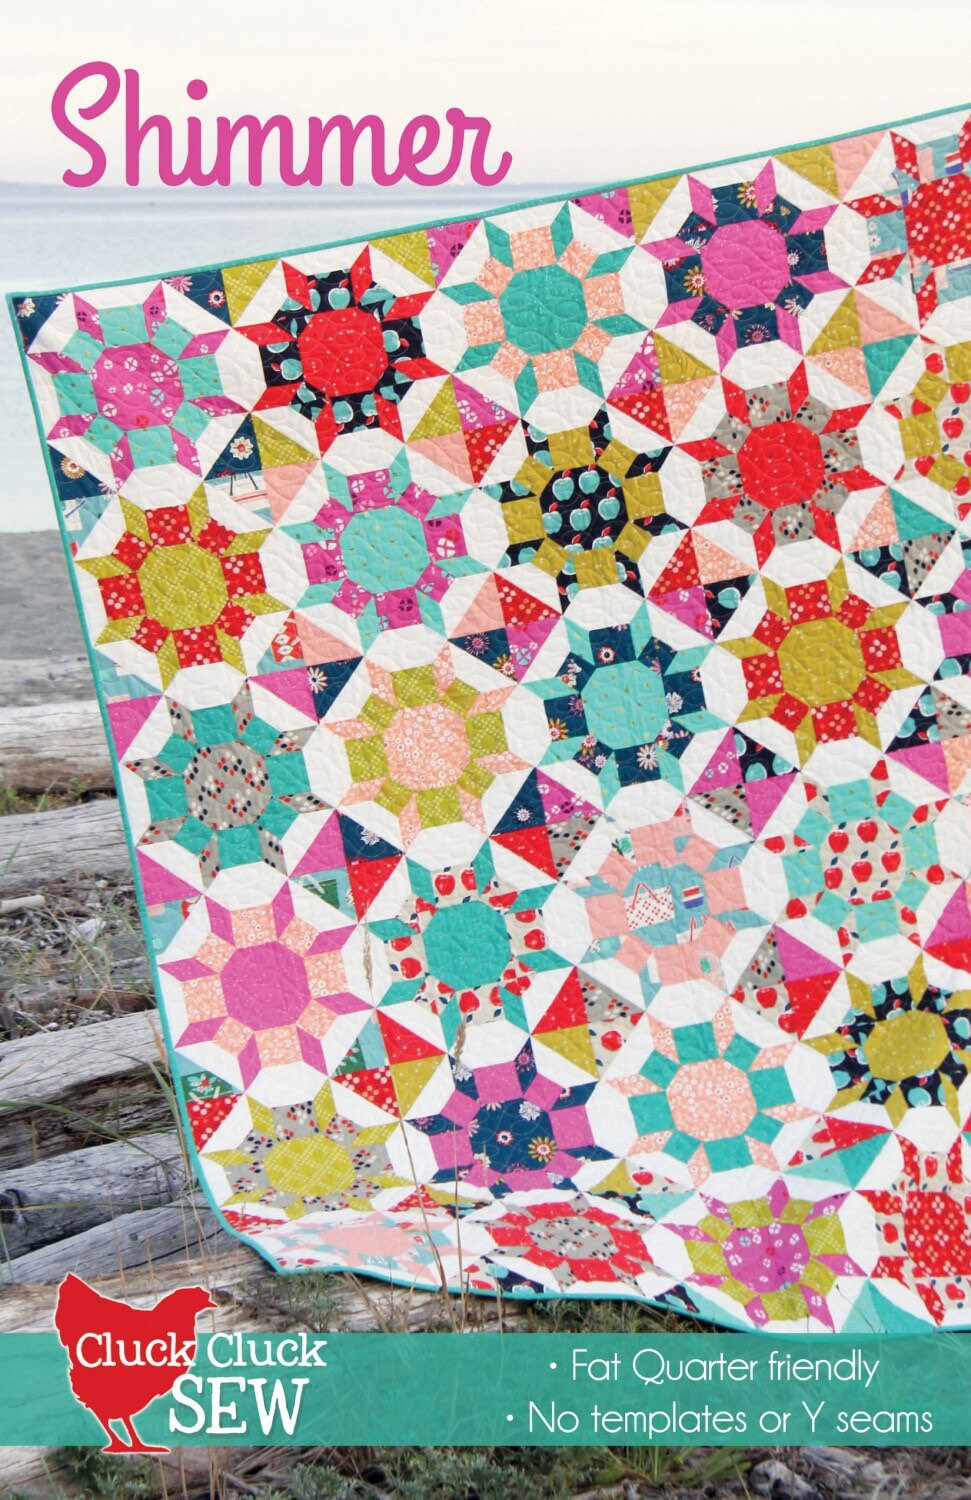 Shimmer Quilt Pattern - Cluck Cluck Sew - Allison Harris - Fat Quarter Friendly - 5 Sizes - No Templates - No Y Seams